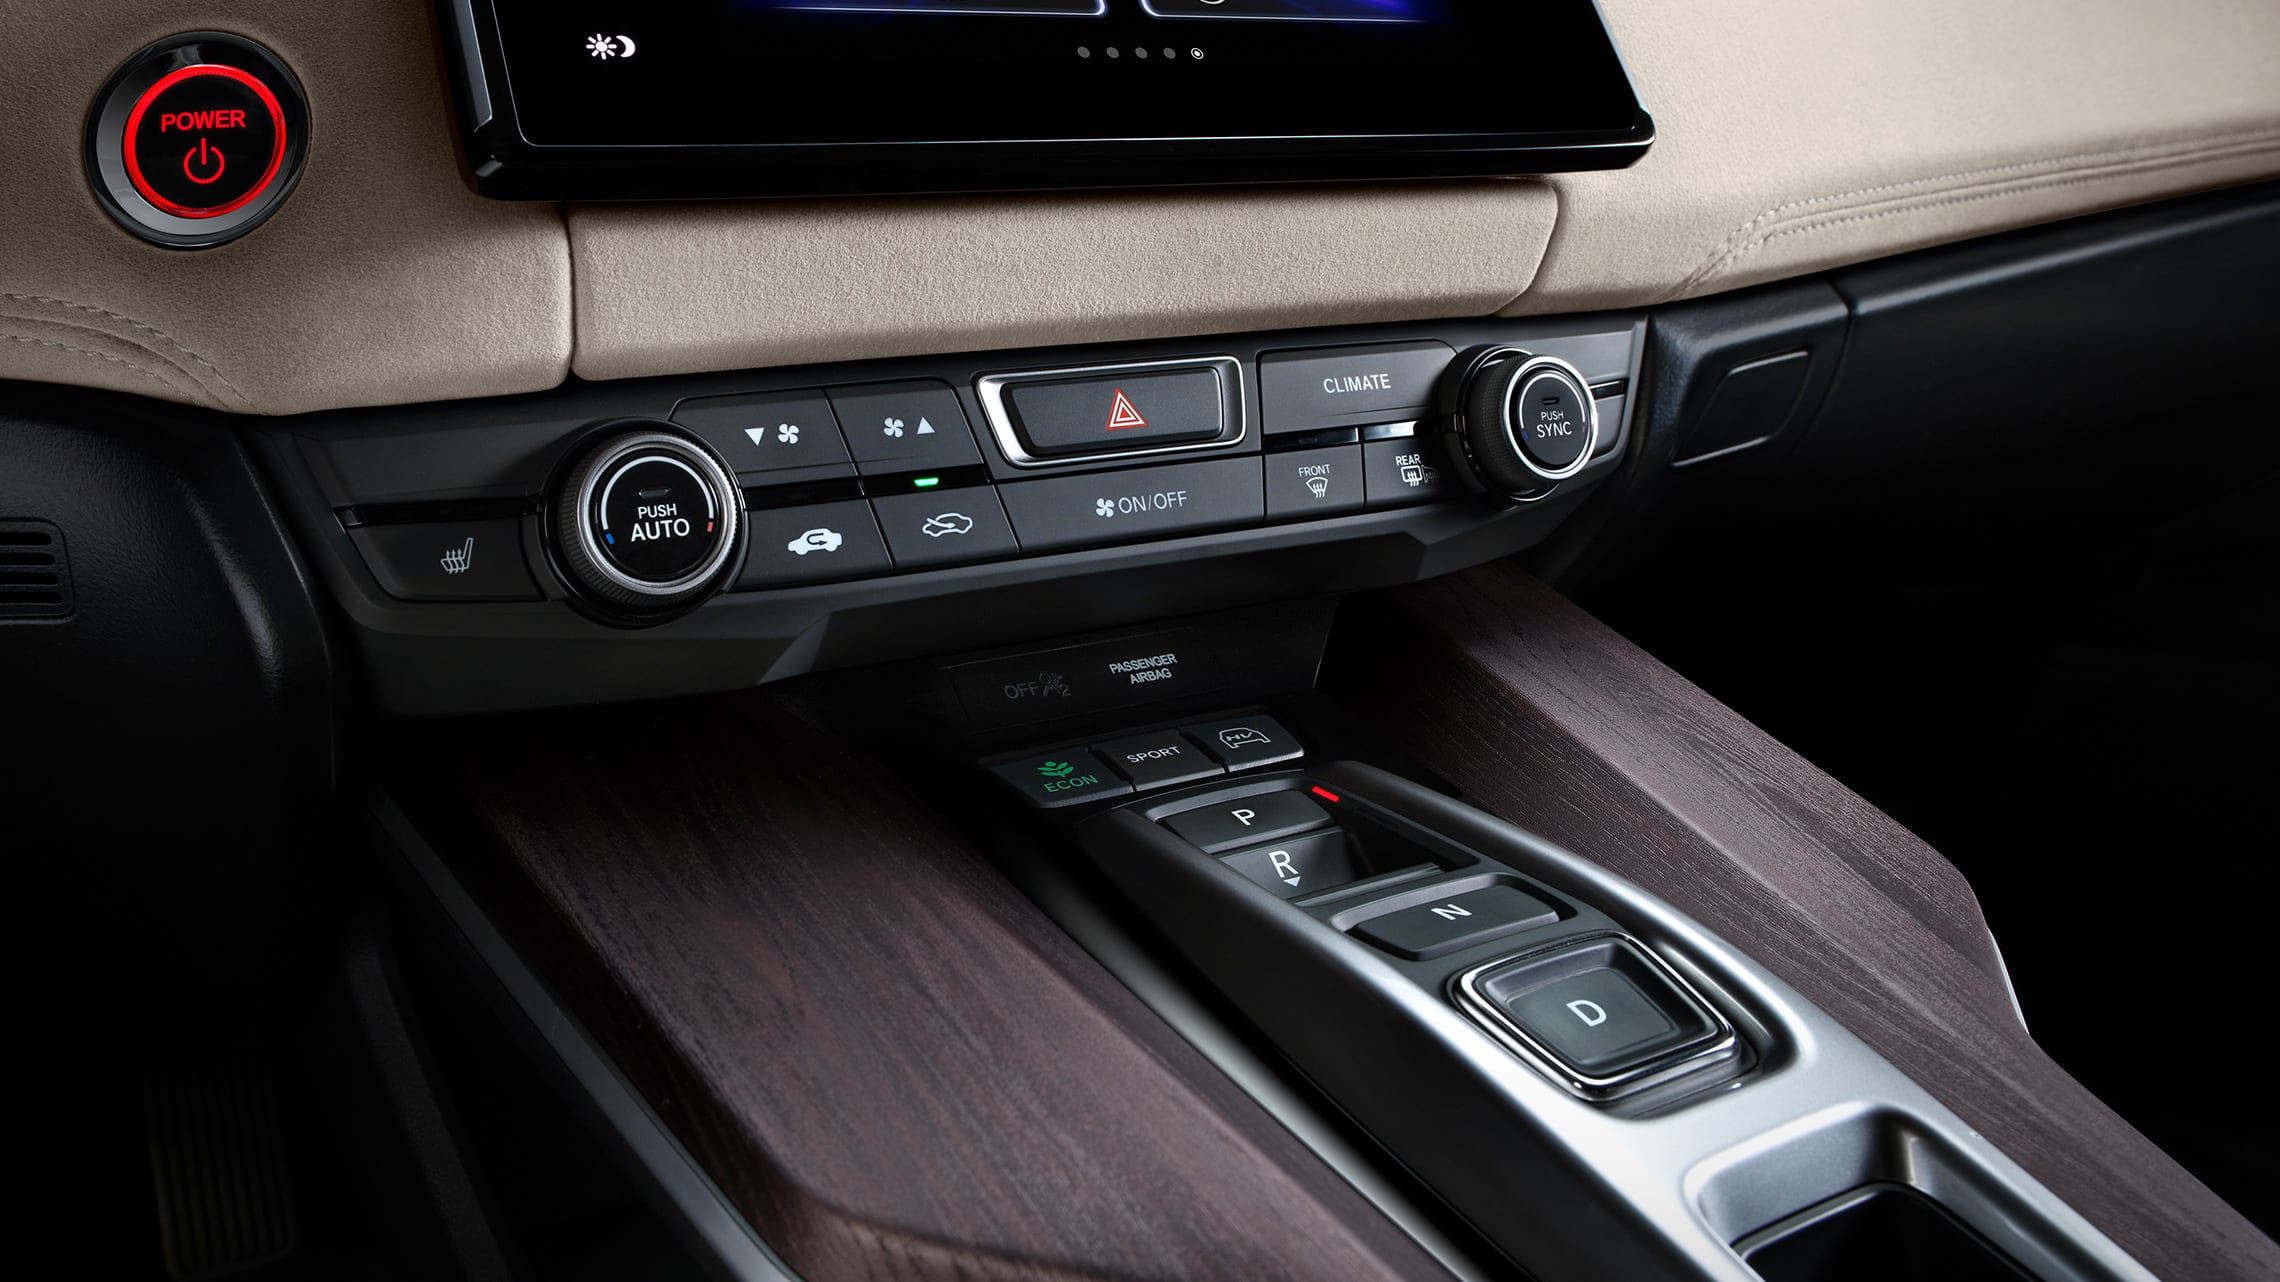 Detail of dual-zone automatic climate controls on center console.